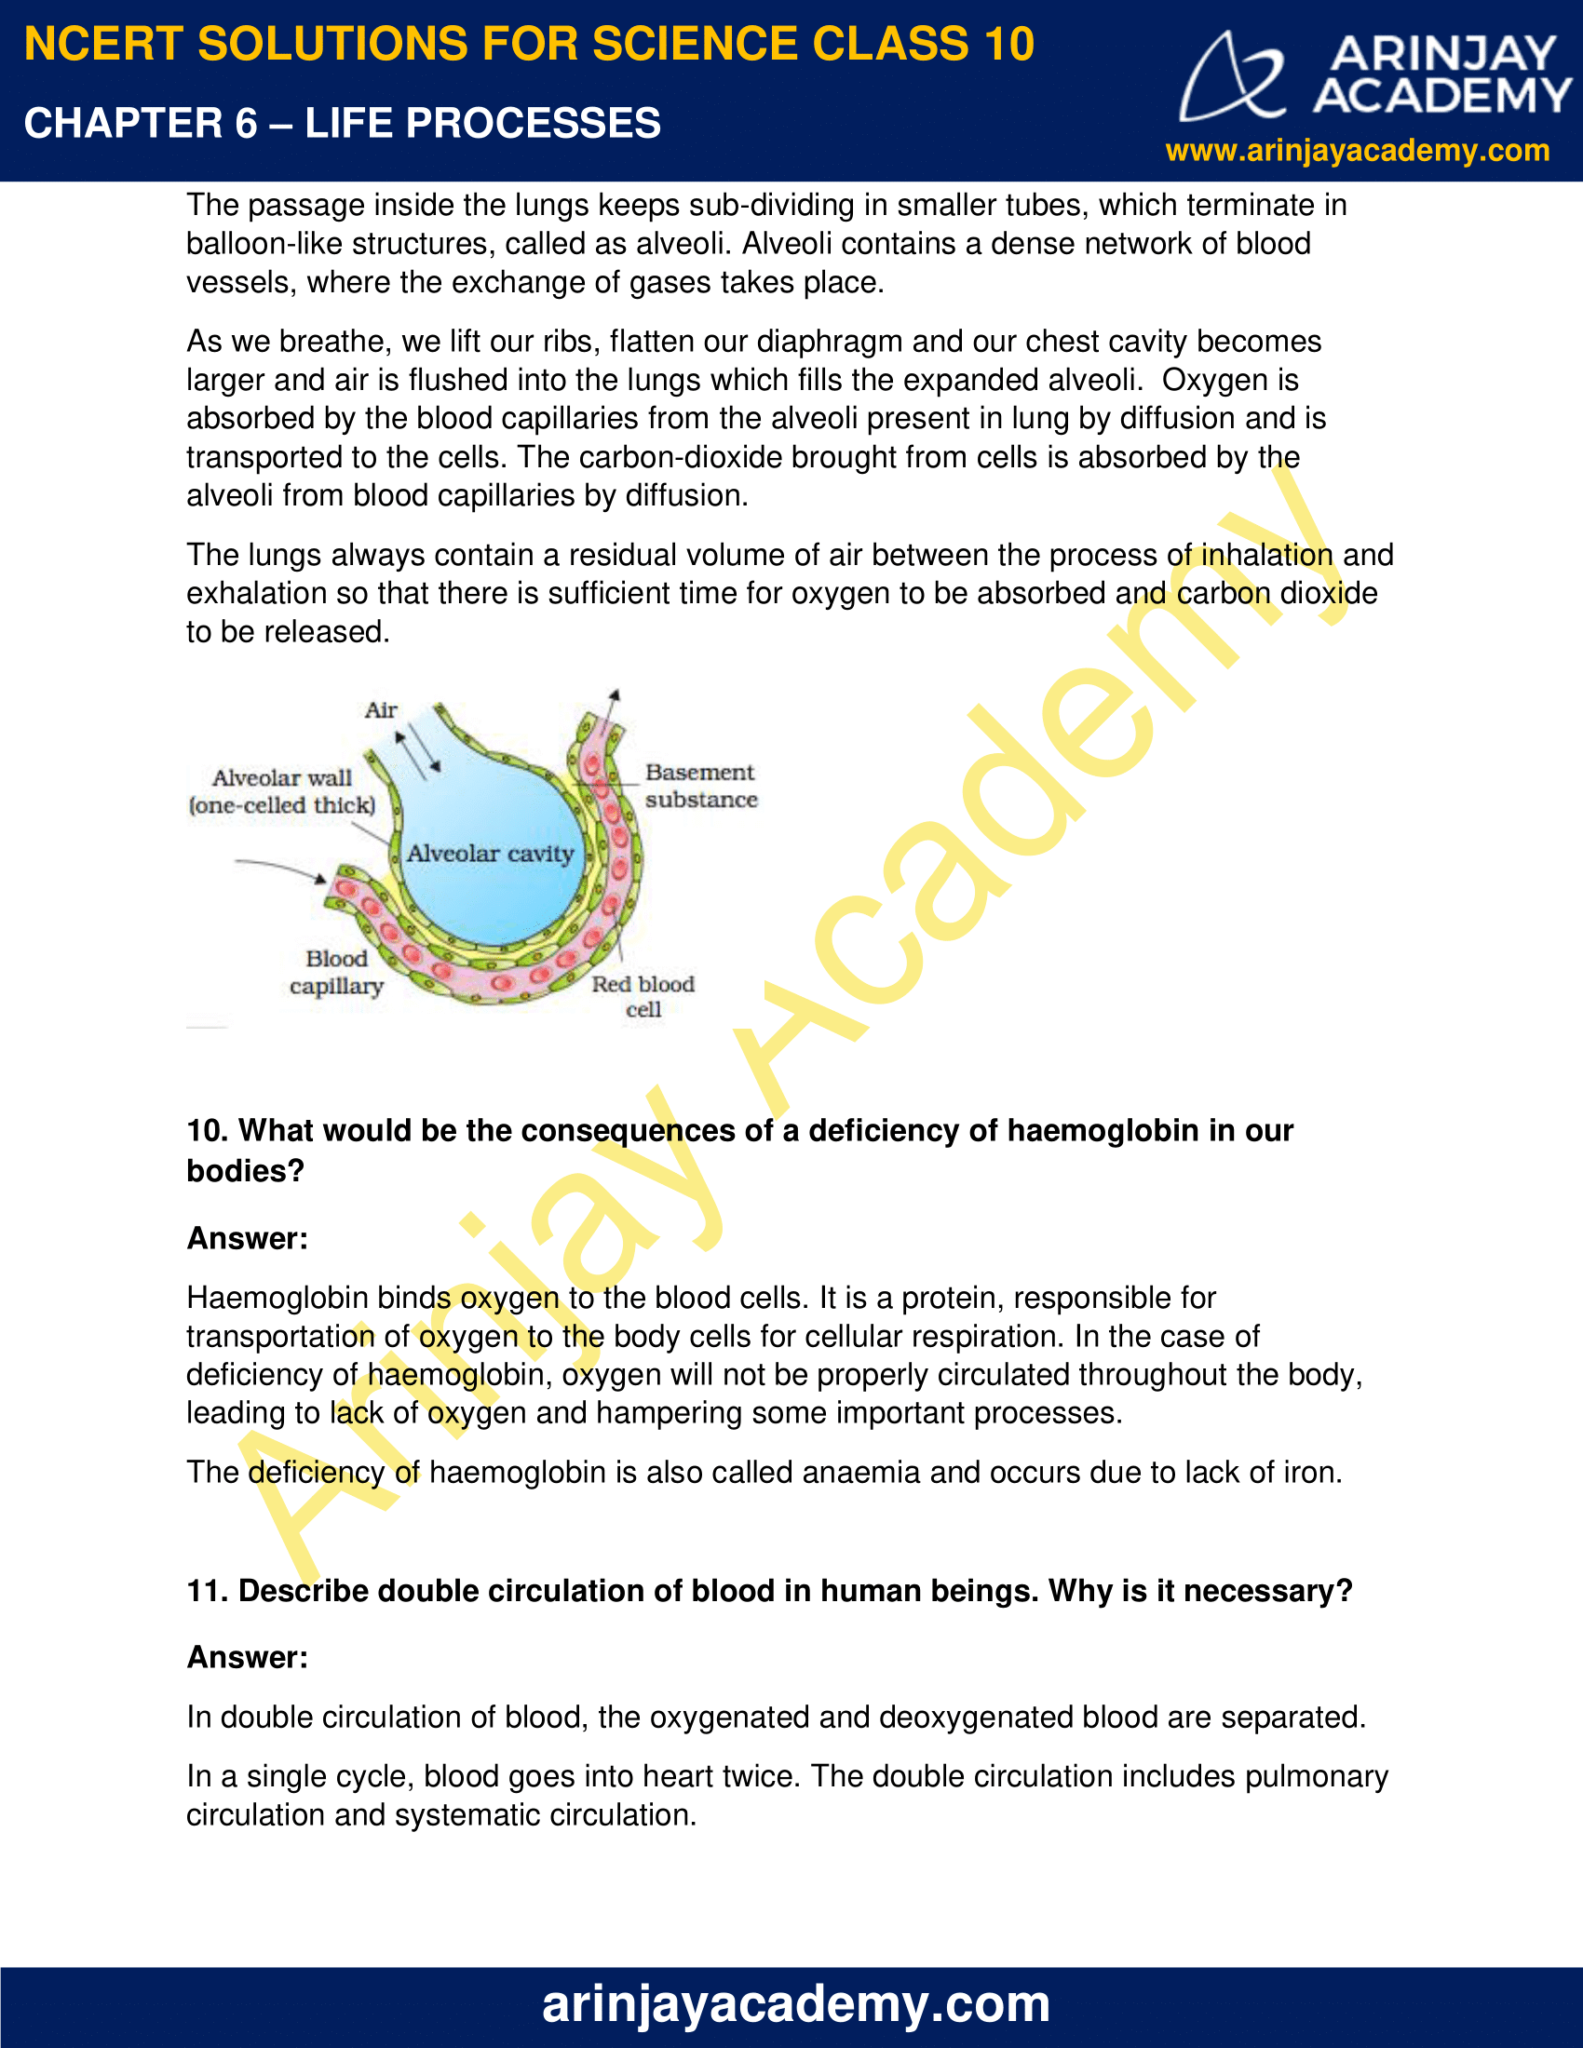 case study questions class 10 science chapter 6